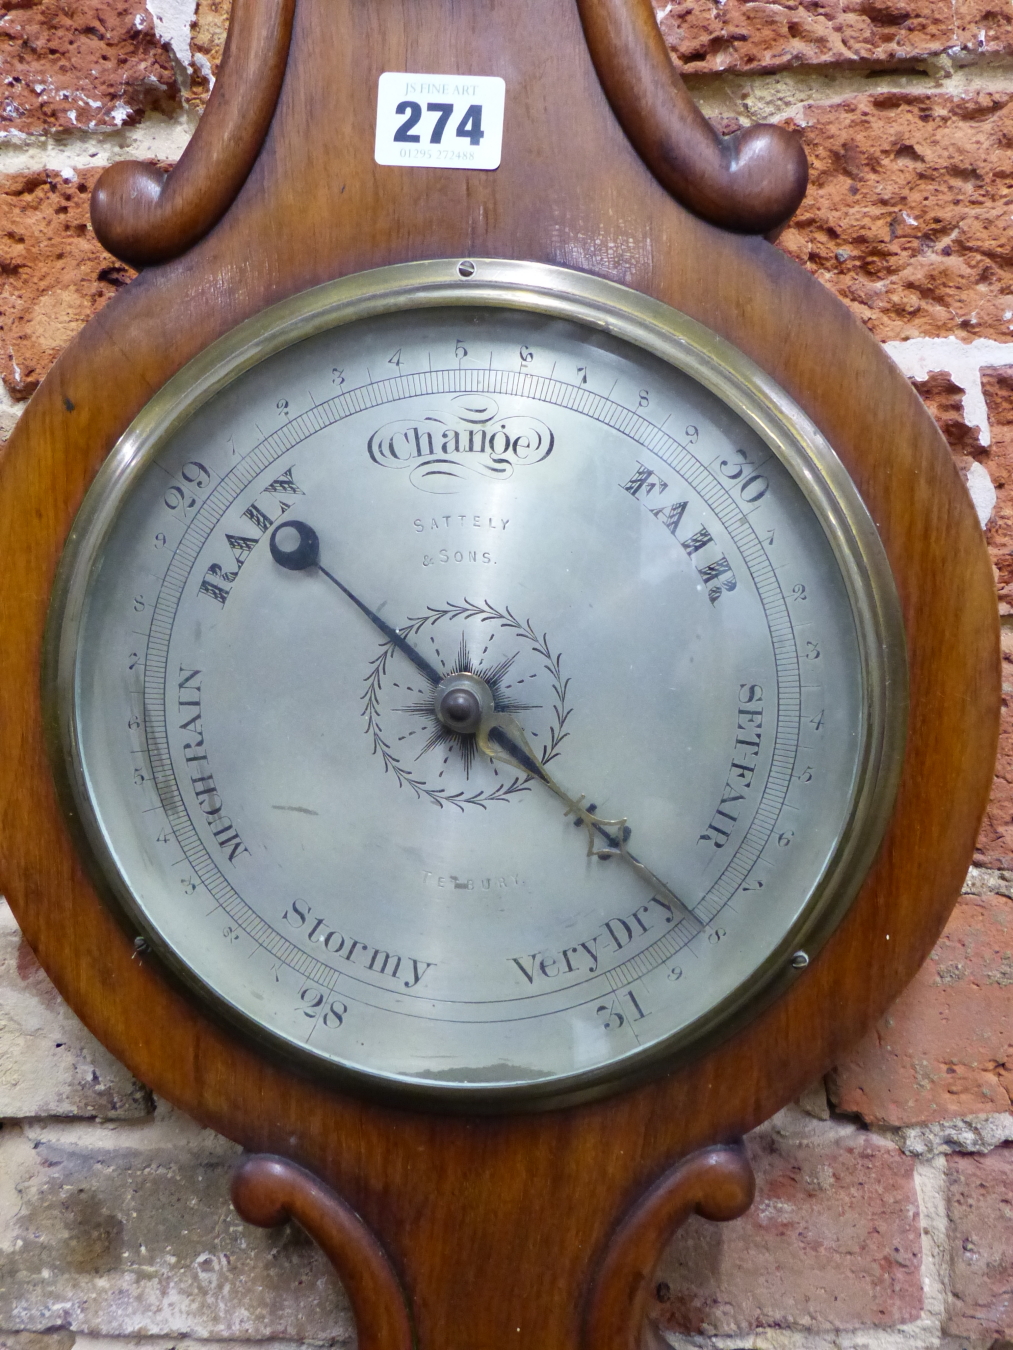 A SATTELY & SONS VICTORIAN MAHOGANY BANJO BAROMETER WITH AN ALCOHOL THERMOMETER ABOVE THE SILVERED - Image 2 of 3